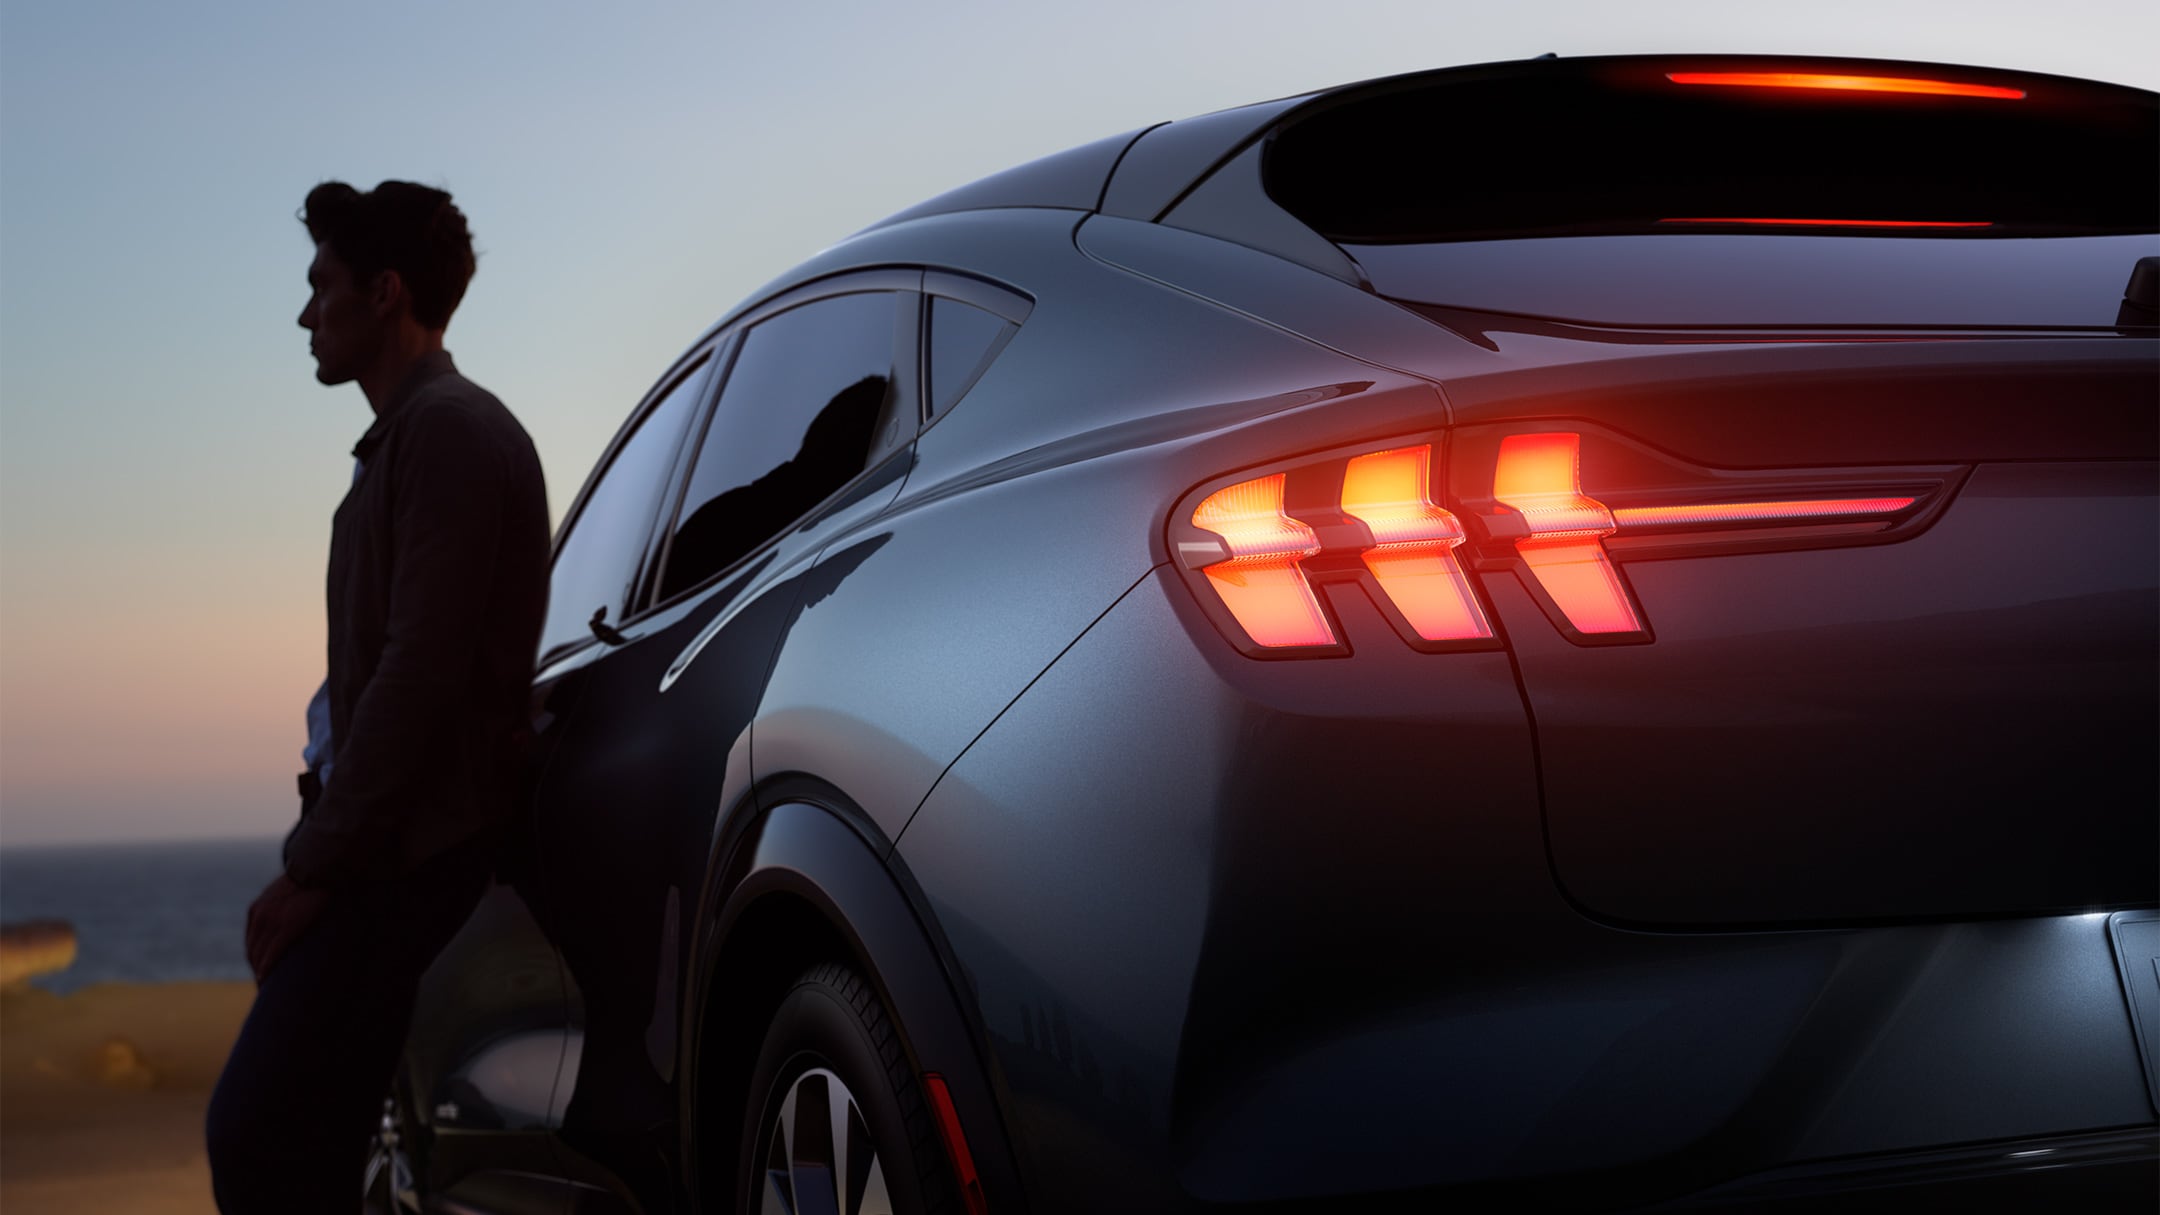 A man leaning against an All-New Ford Mustang Mach-E at sunset